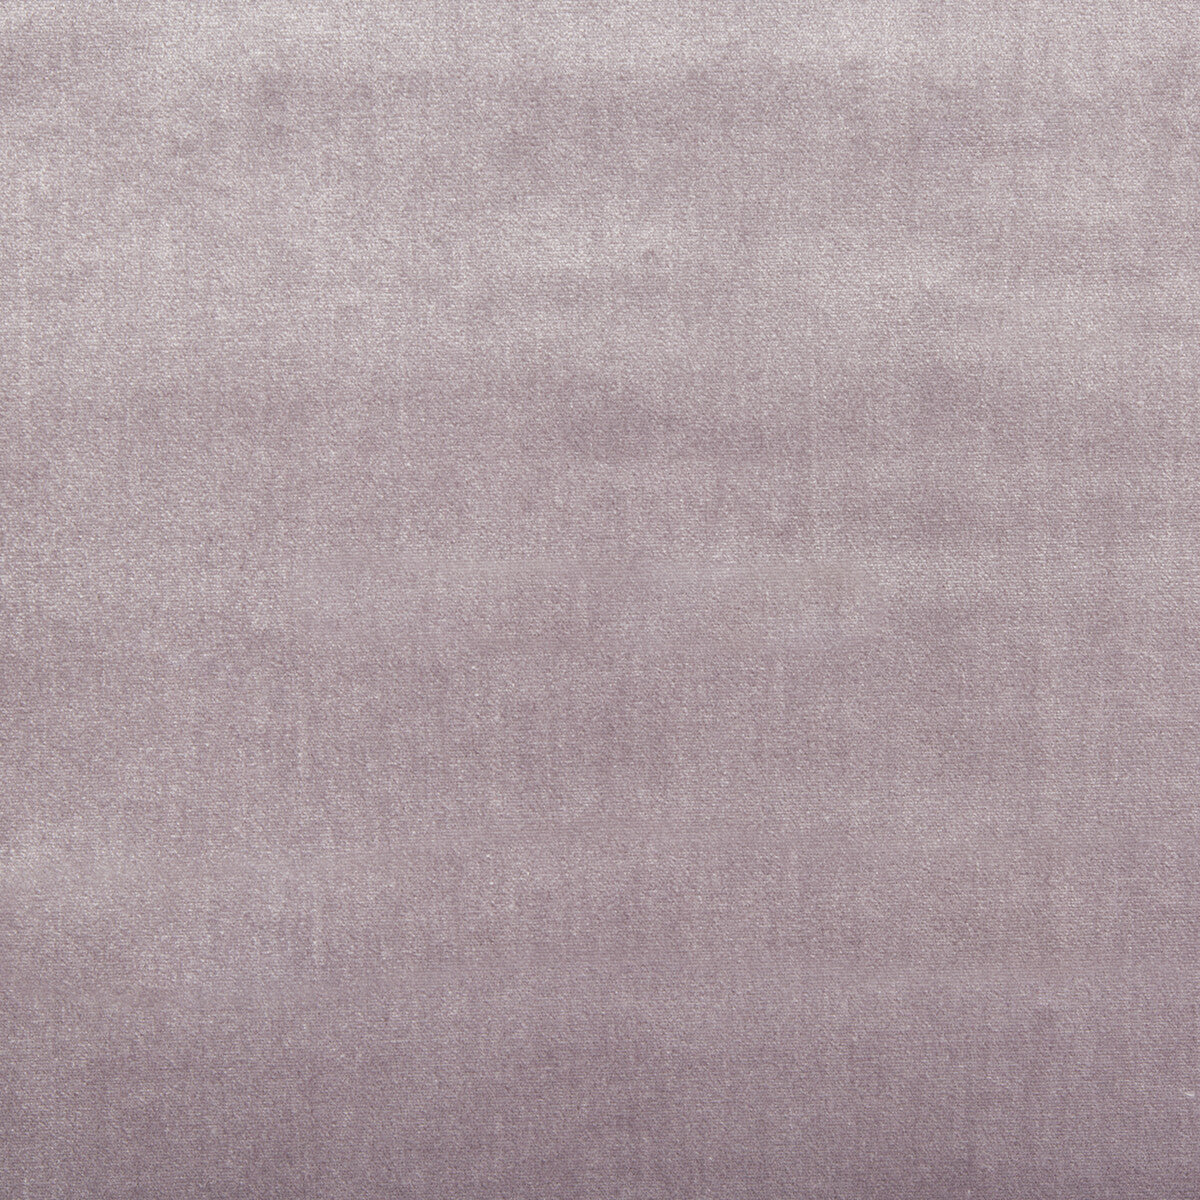 Duchess Velvet fabric in lilac color - pattern 2016121.10.0 - by Lee Jofa